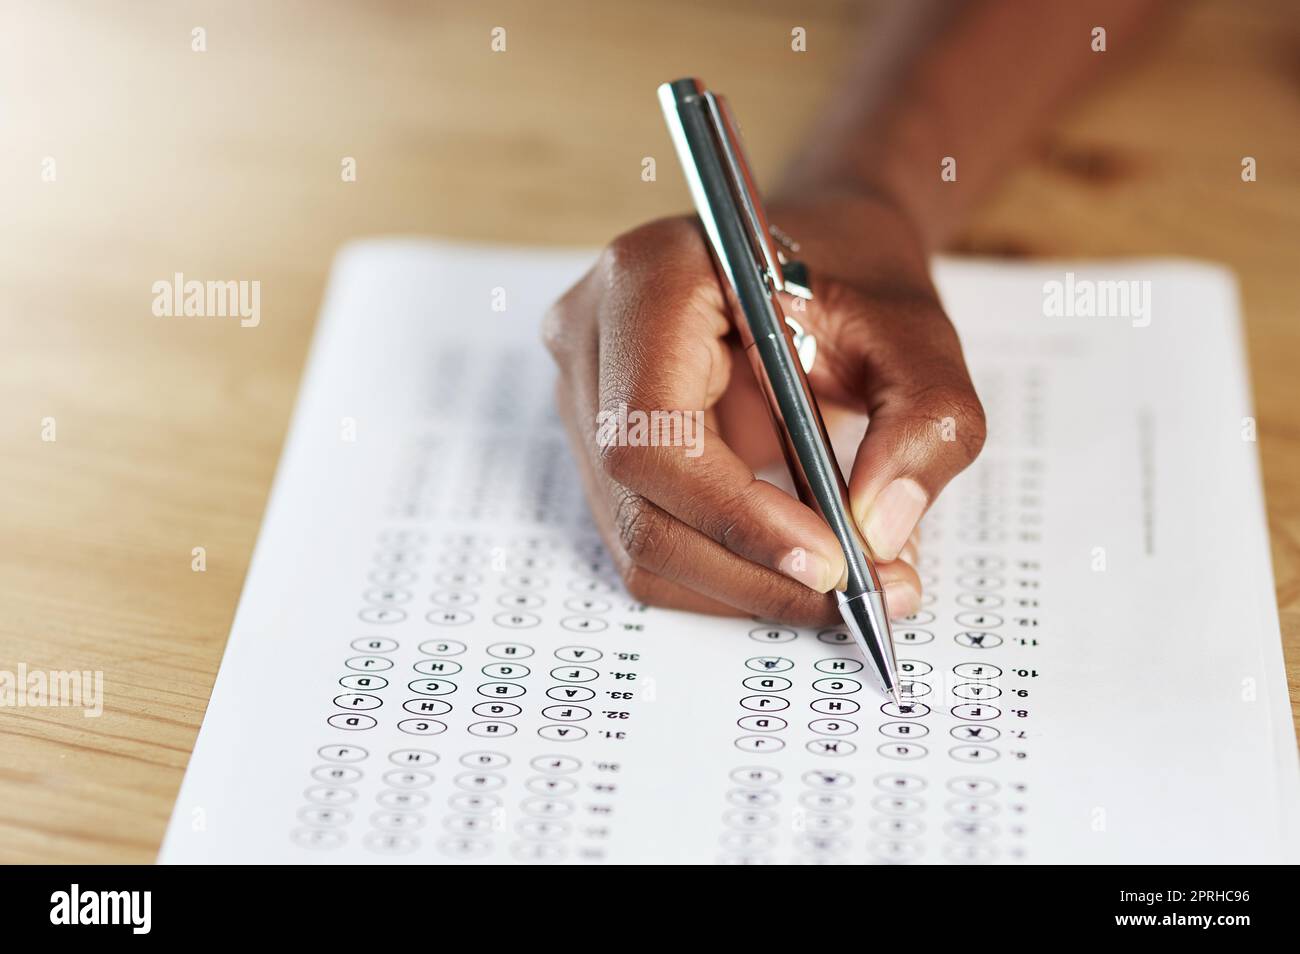 Those hours of studying will pay off. a person filling in an answer sheet for a test. Stock Photo